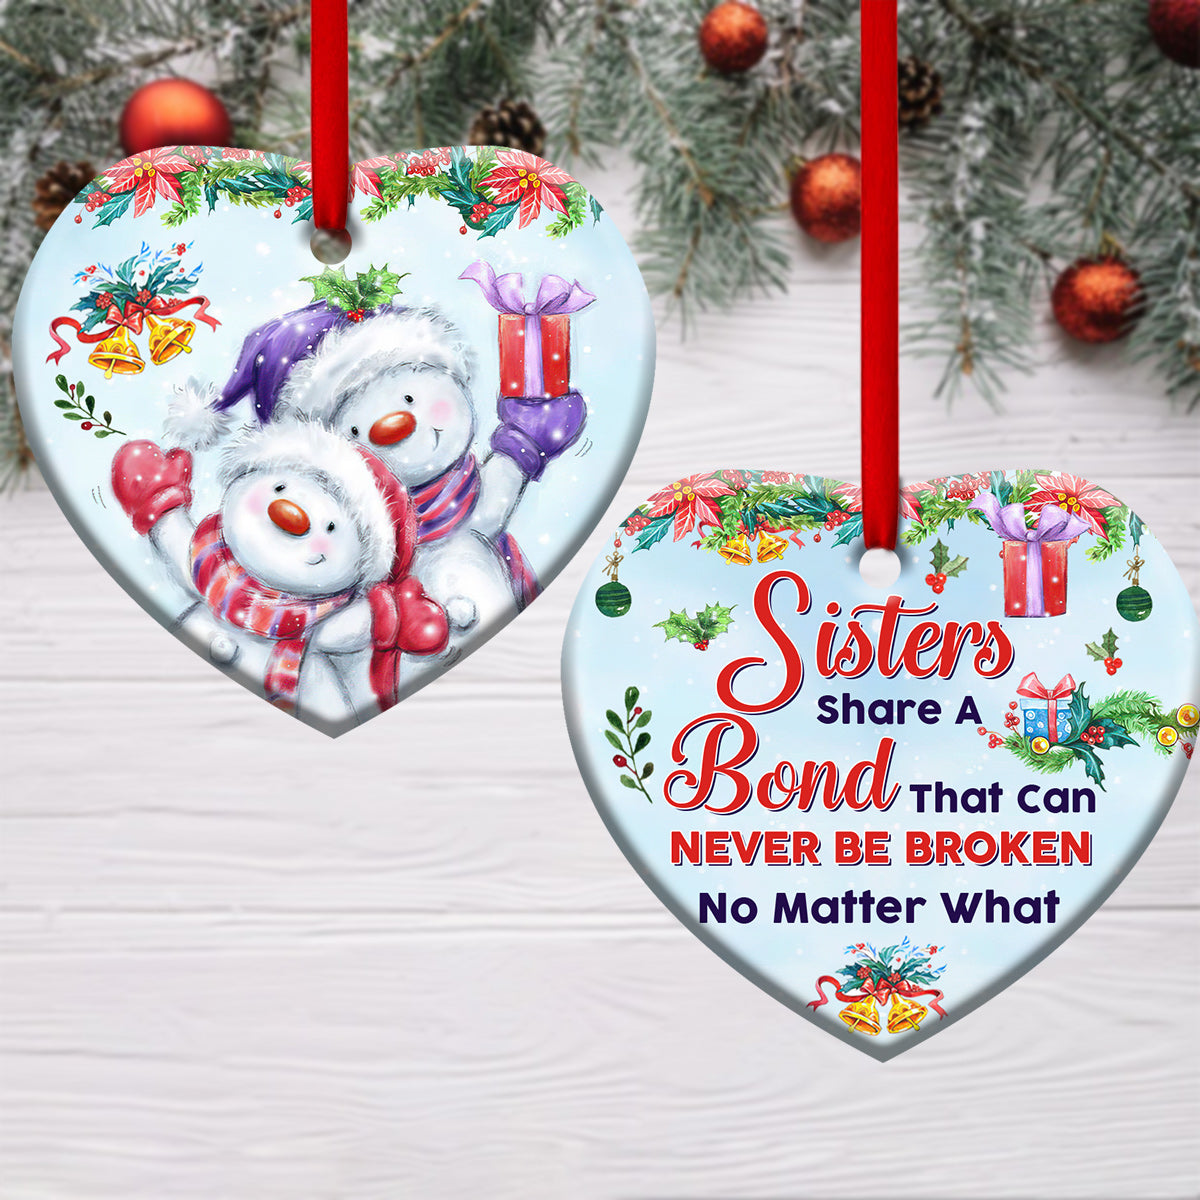 Sister Snowman Sisters Share A Bond That Can Never Be Broken Heart Ceramic Ornament - Christmas Ornament - Christmas Gift